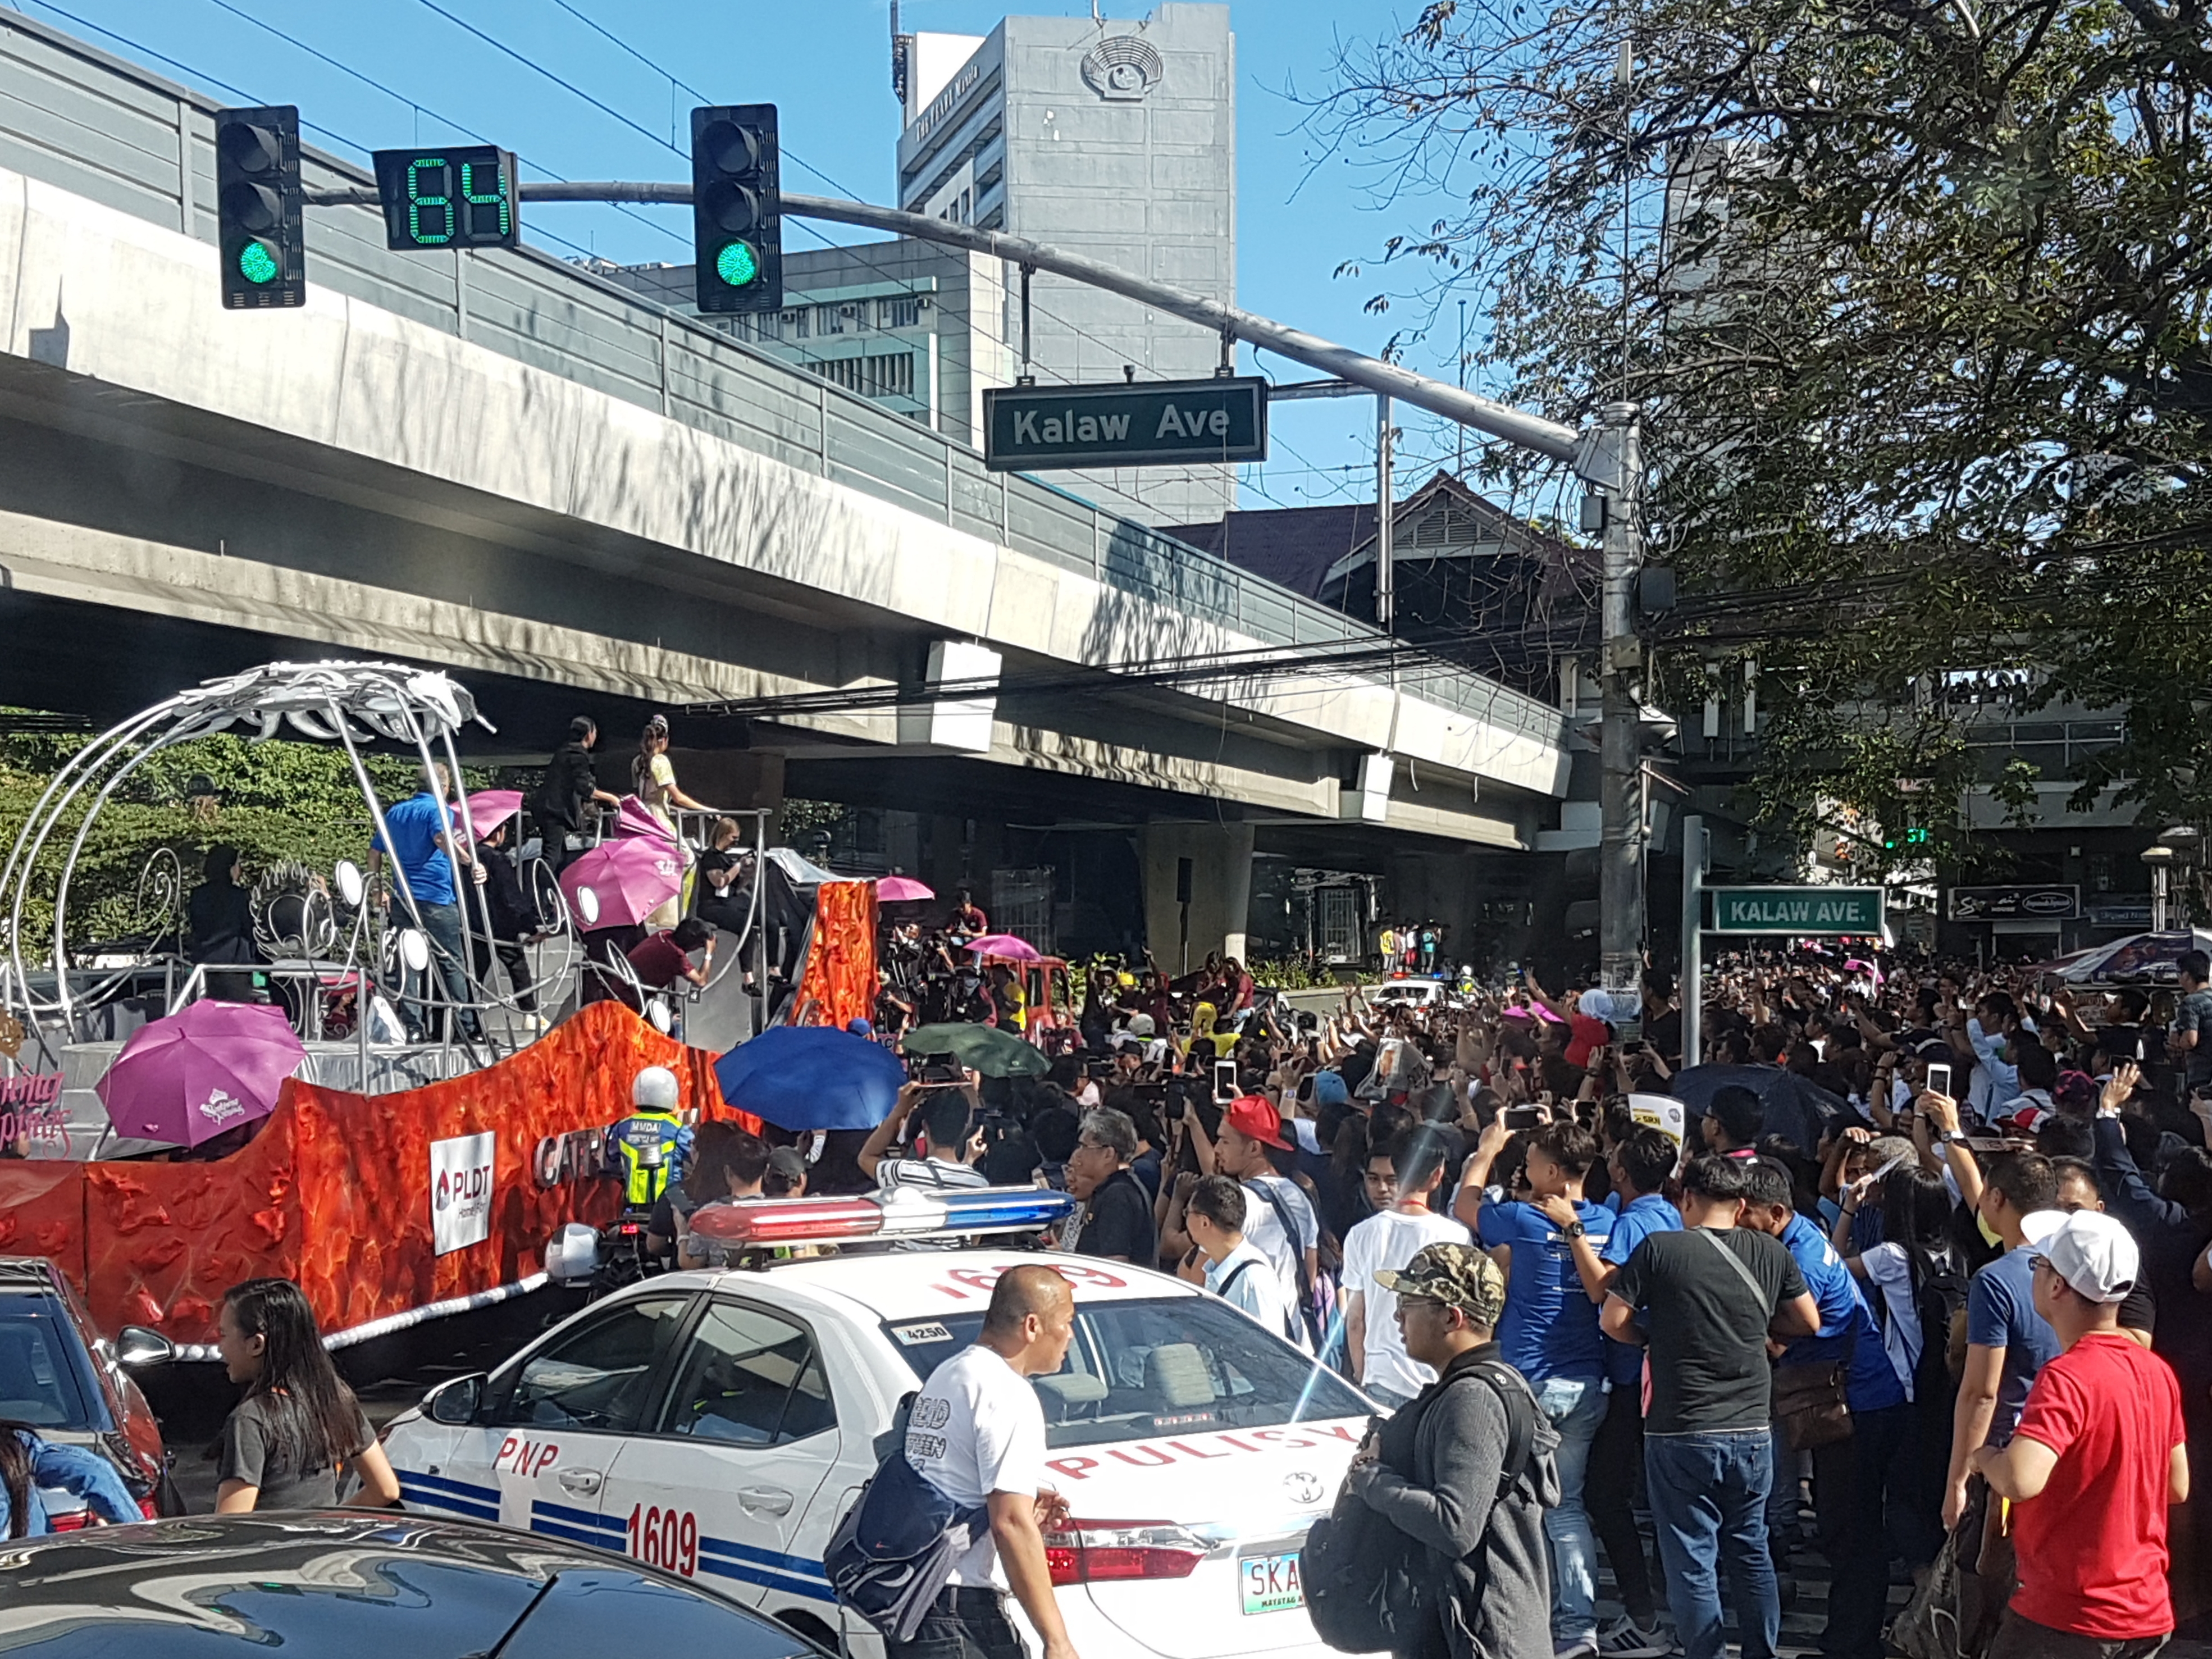 Miss Universe 2018 Catriona Gray’s homecoming parade: Fit for a queen